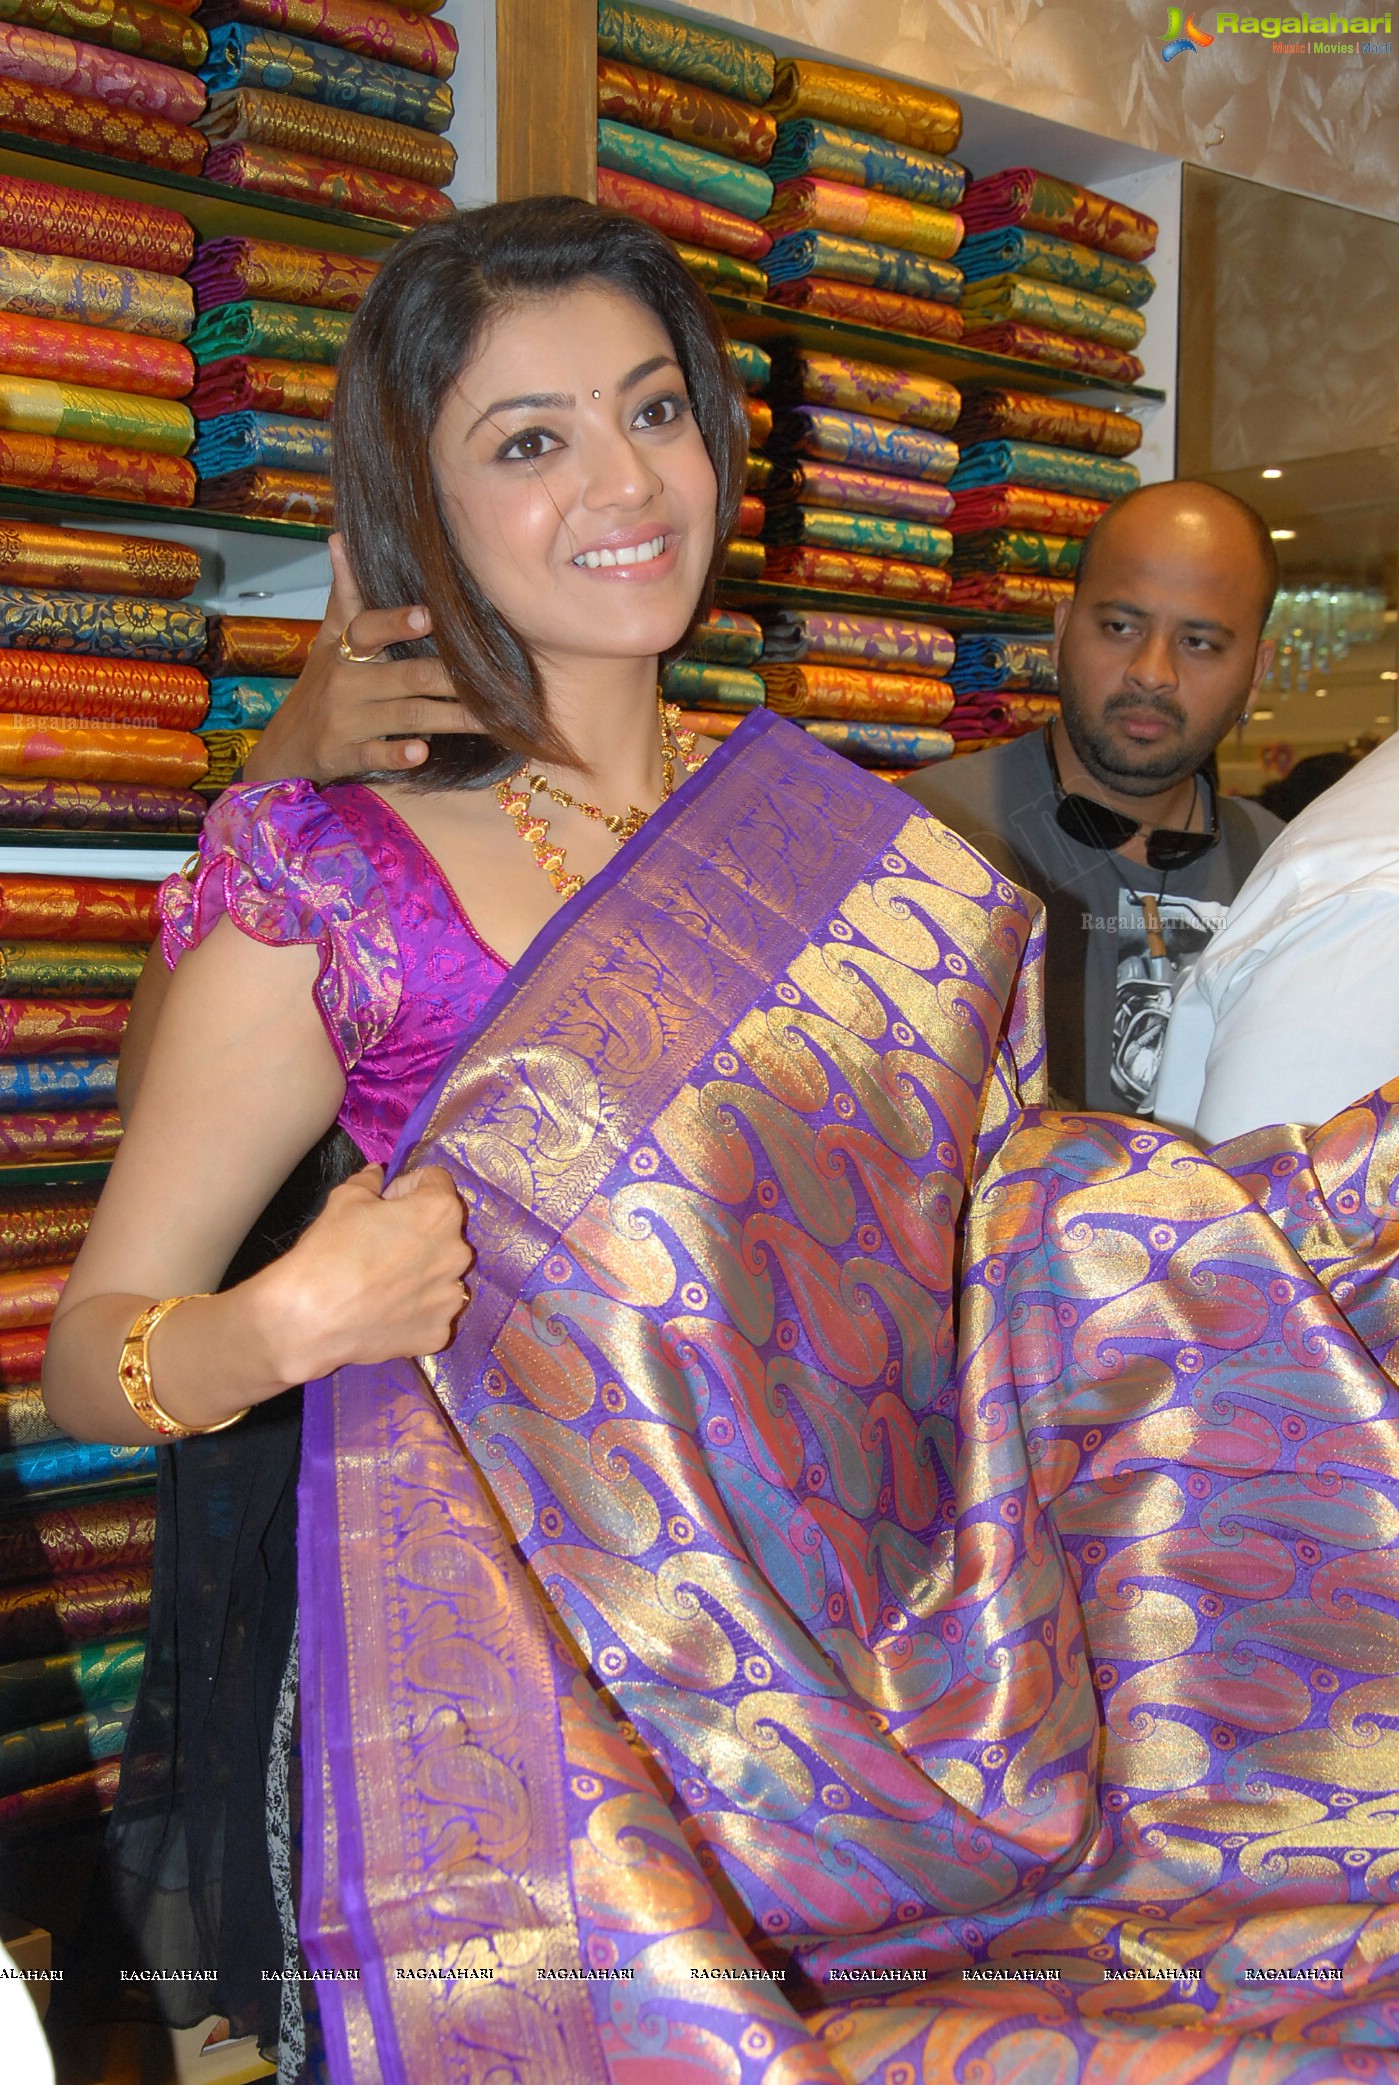 Kajal Aggarwal in Purple Saree Chennai Shopping Mall, Hyderabad, Gallery, Images